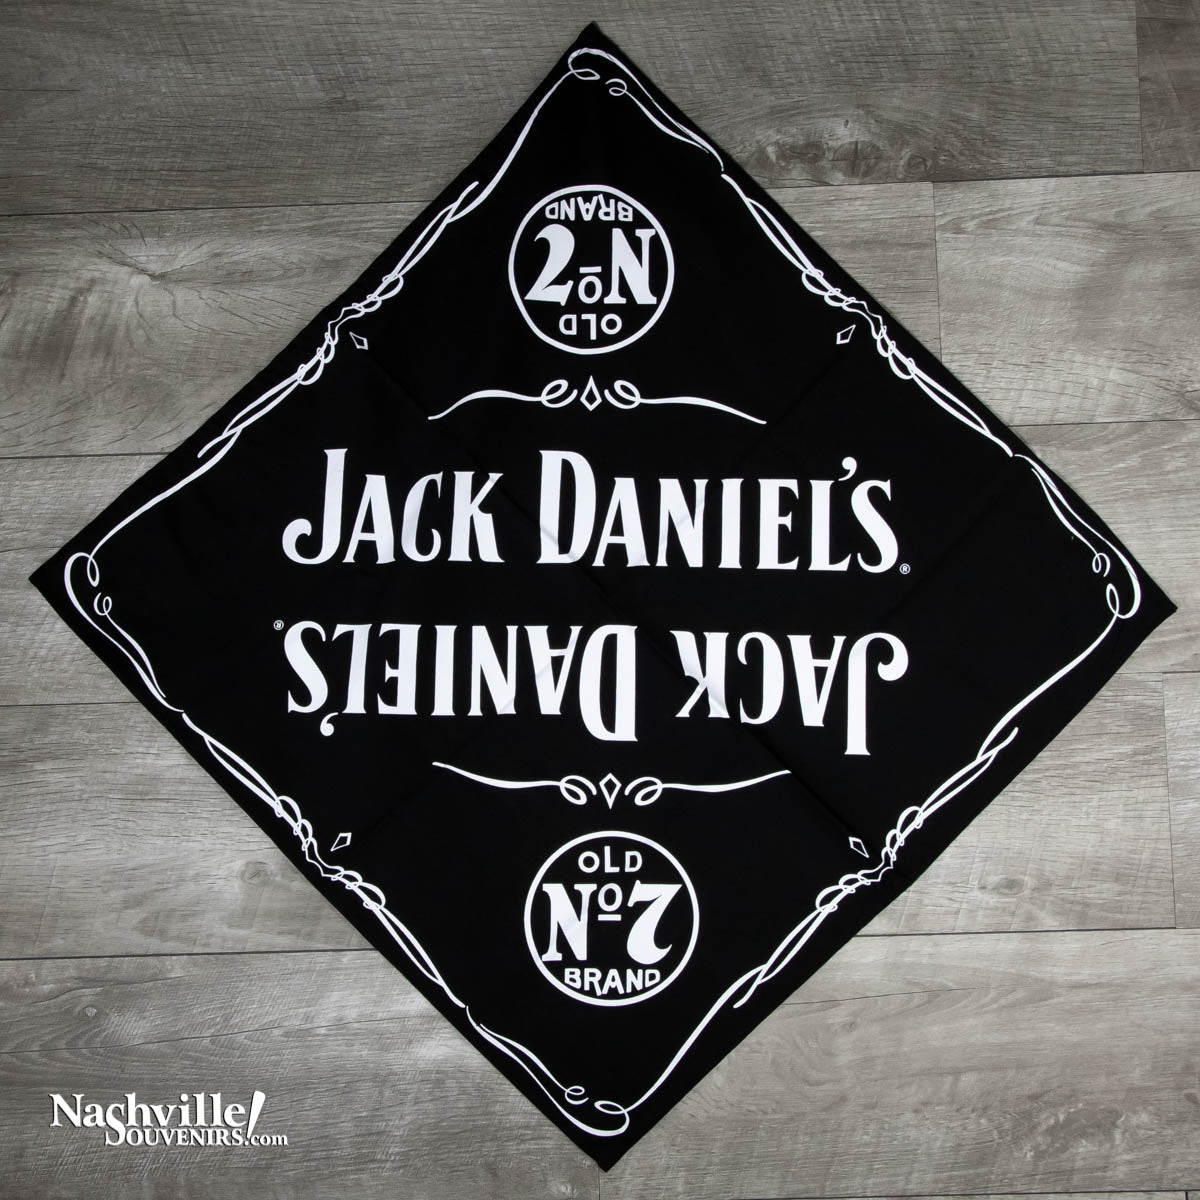 Here's the brand new, officially licensed Jack Daniel's bandana. This can be worn multiple ways giving you several options to show your love of that great Tennessee Whiskey.